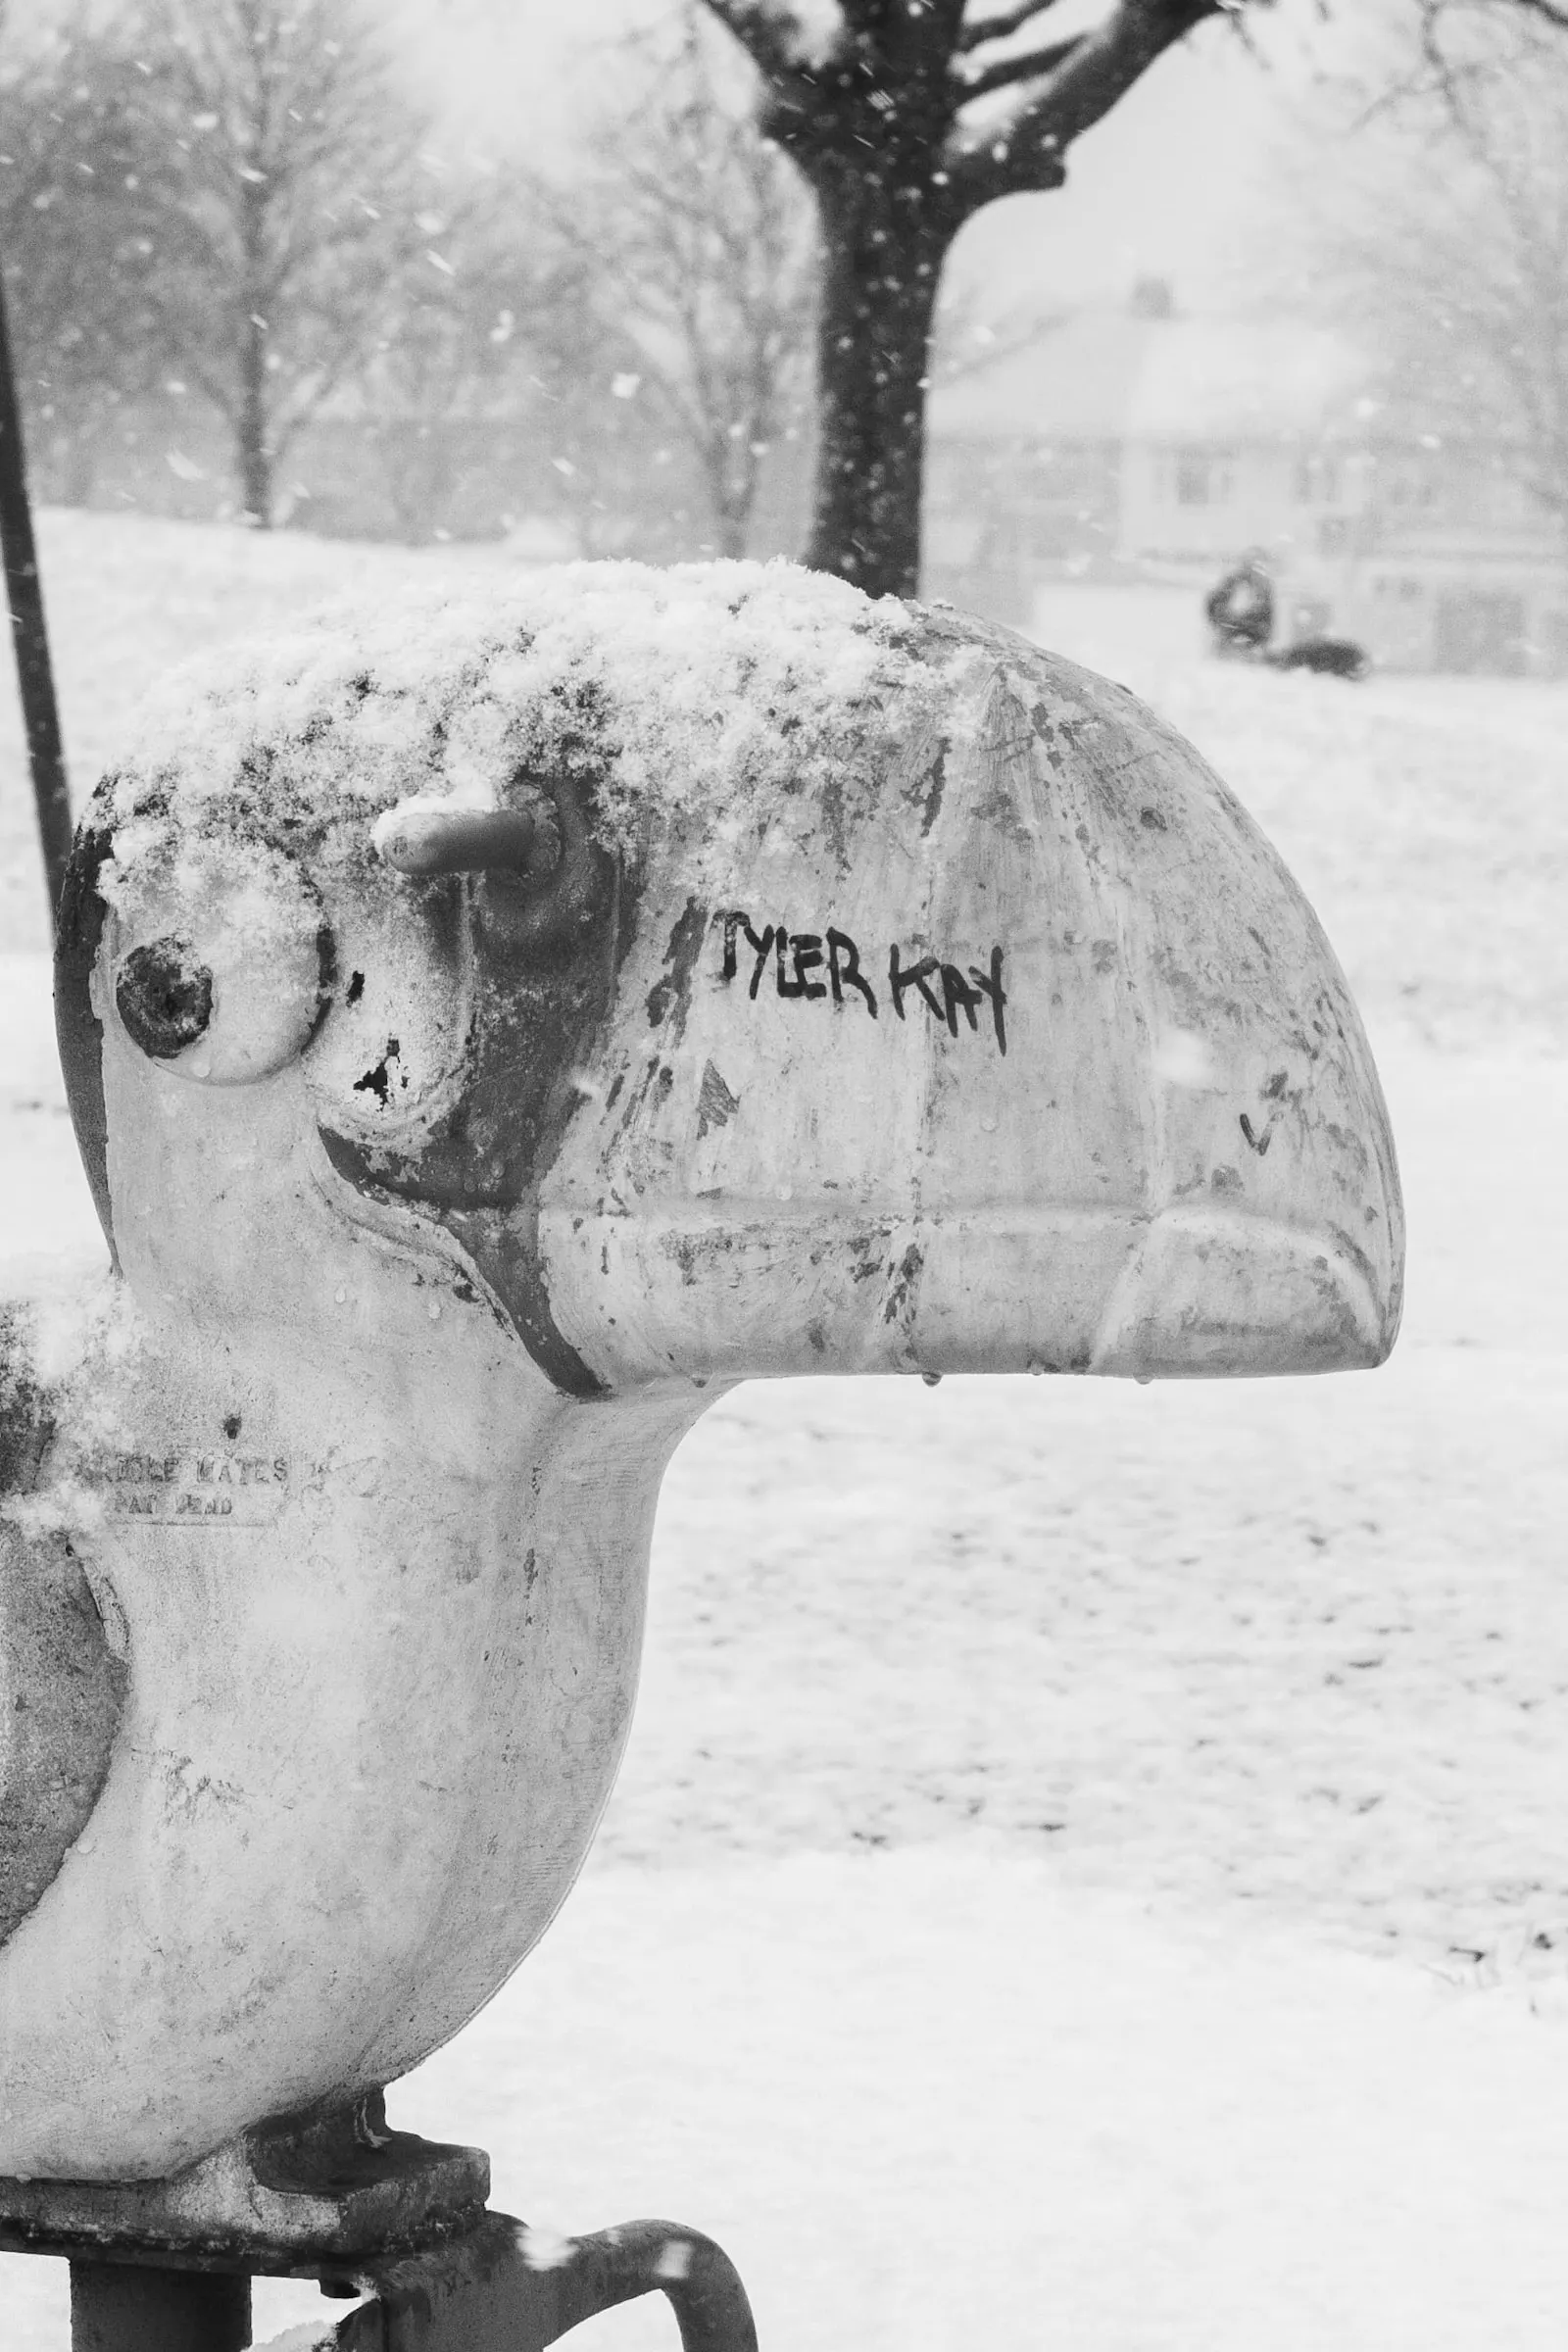 A playground toy is covered with snow and a graffiti tag